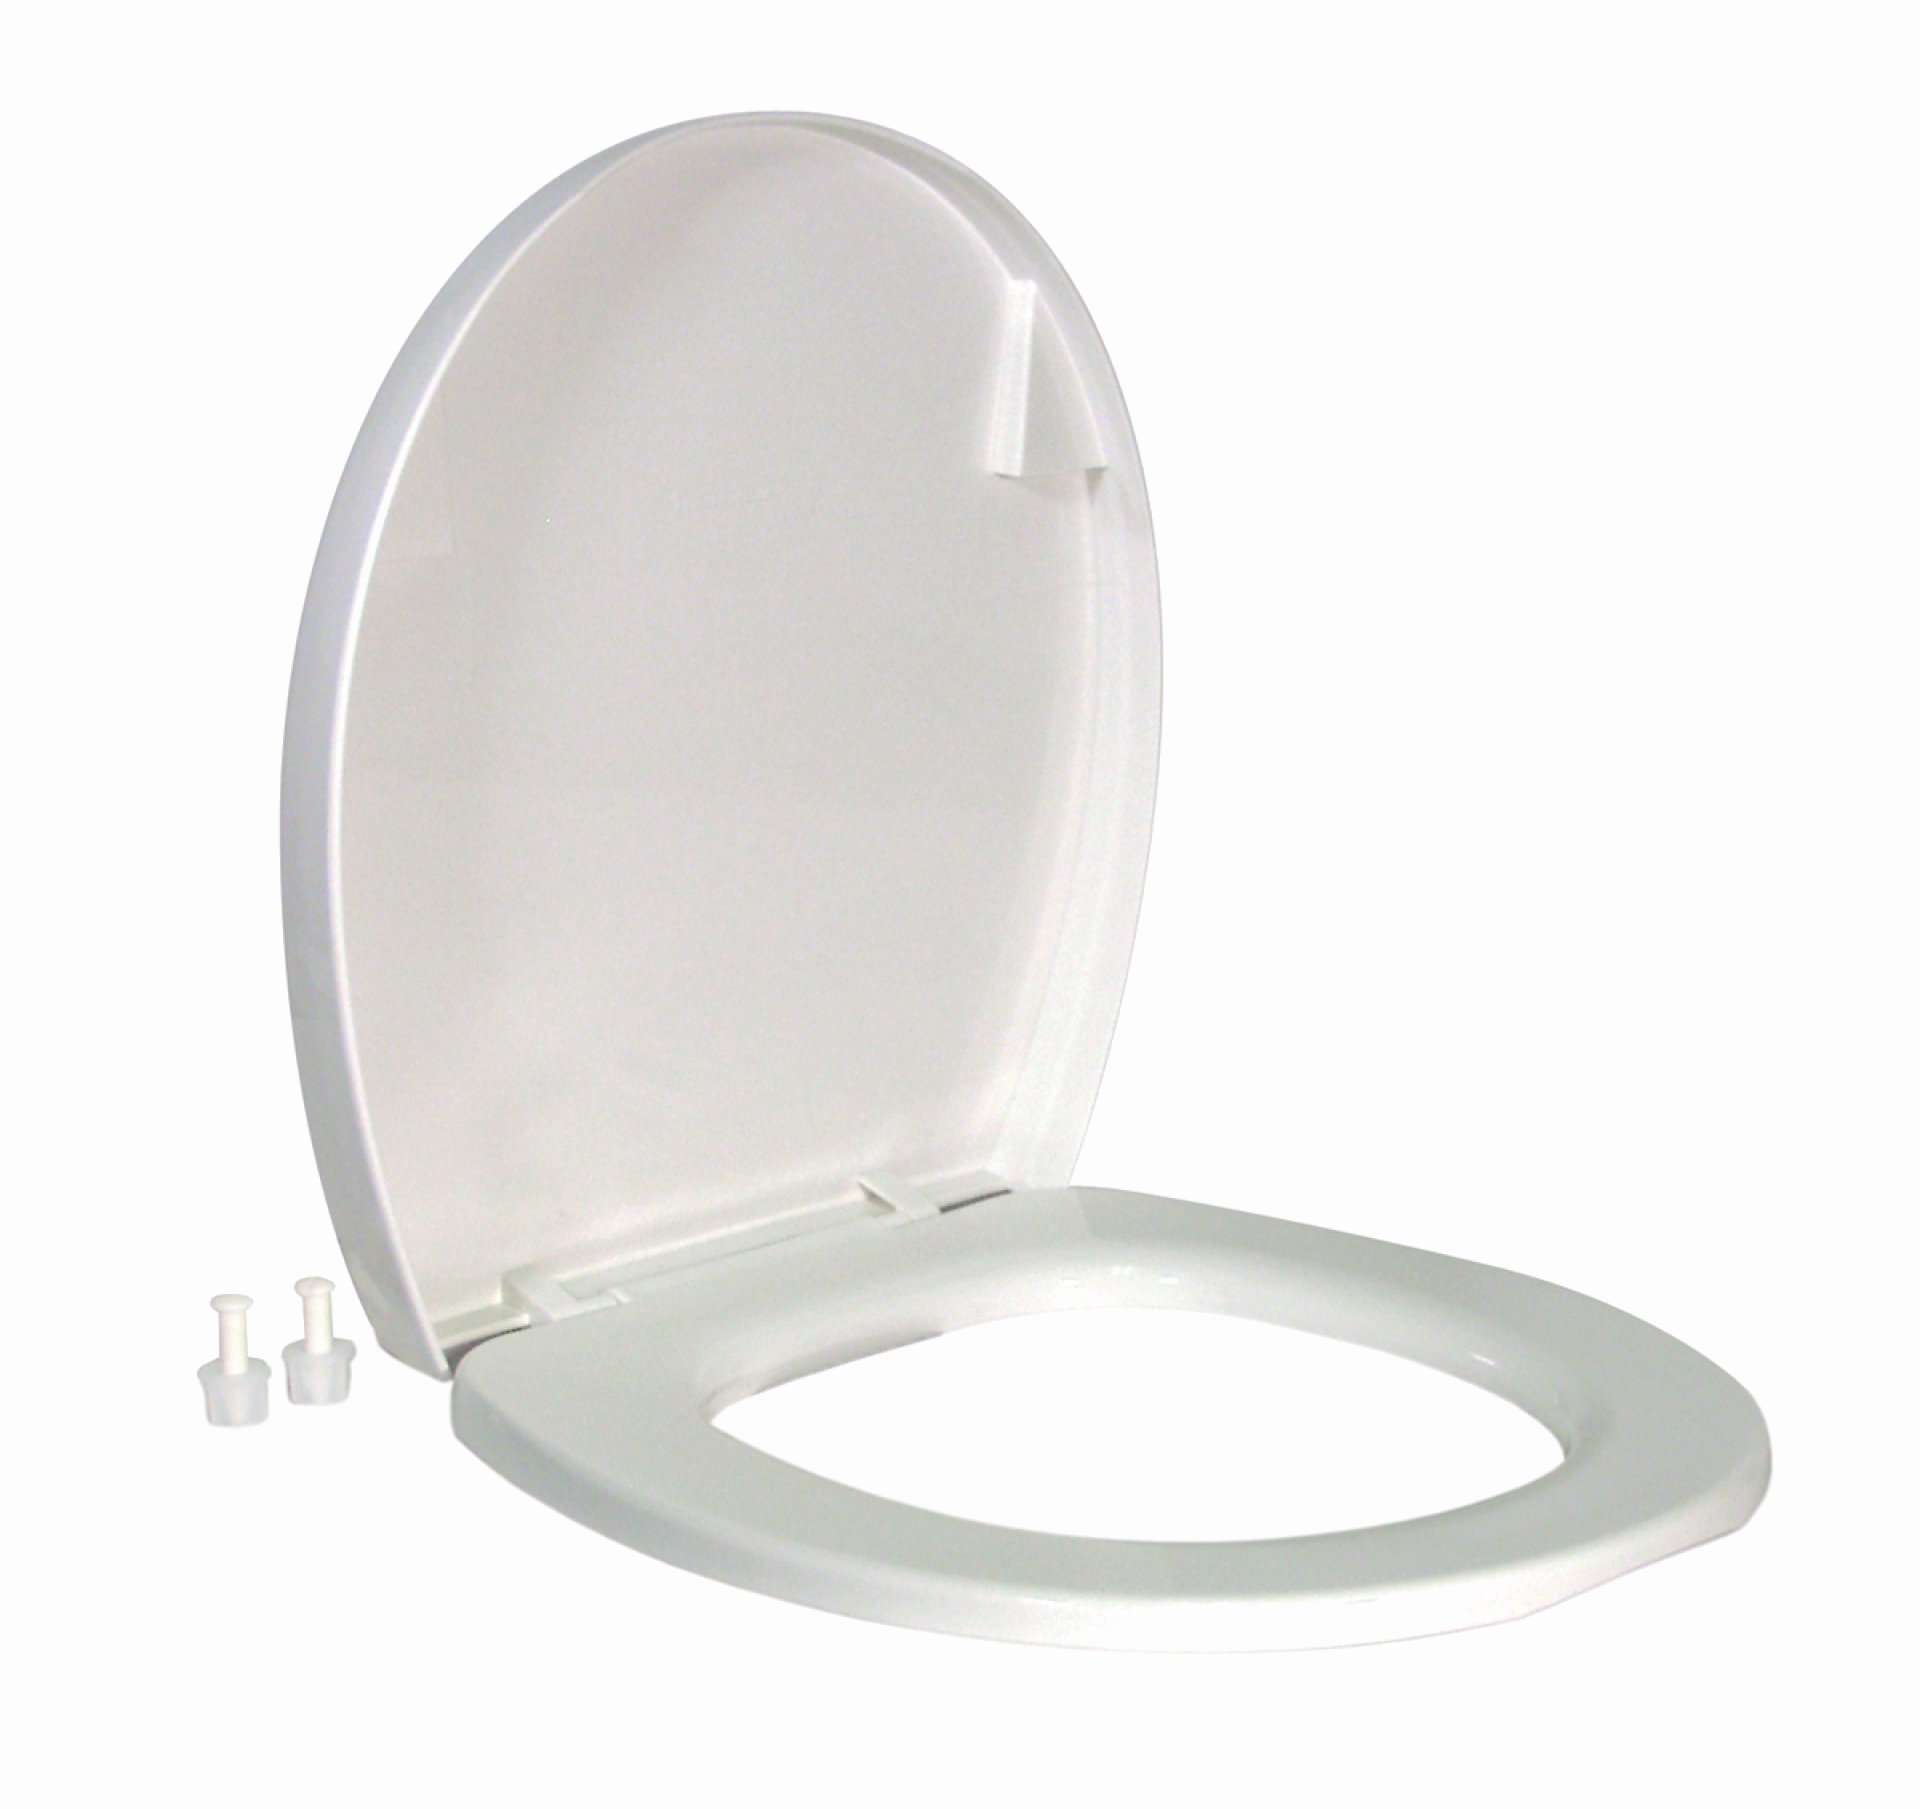 THETFORD CORP | 42178 | SEAT AND COVER FOR RESIDENCE TOILET - WHITE